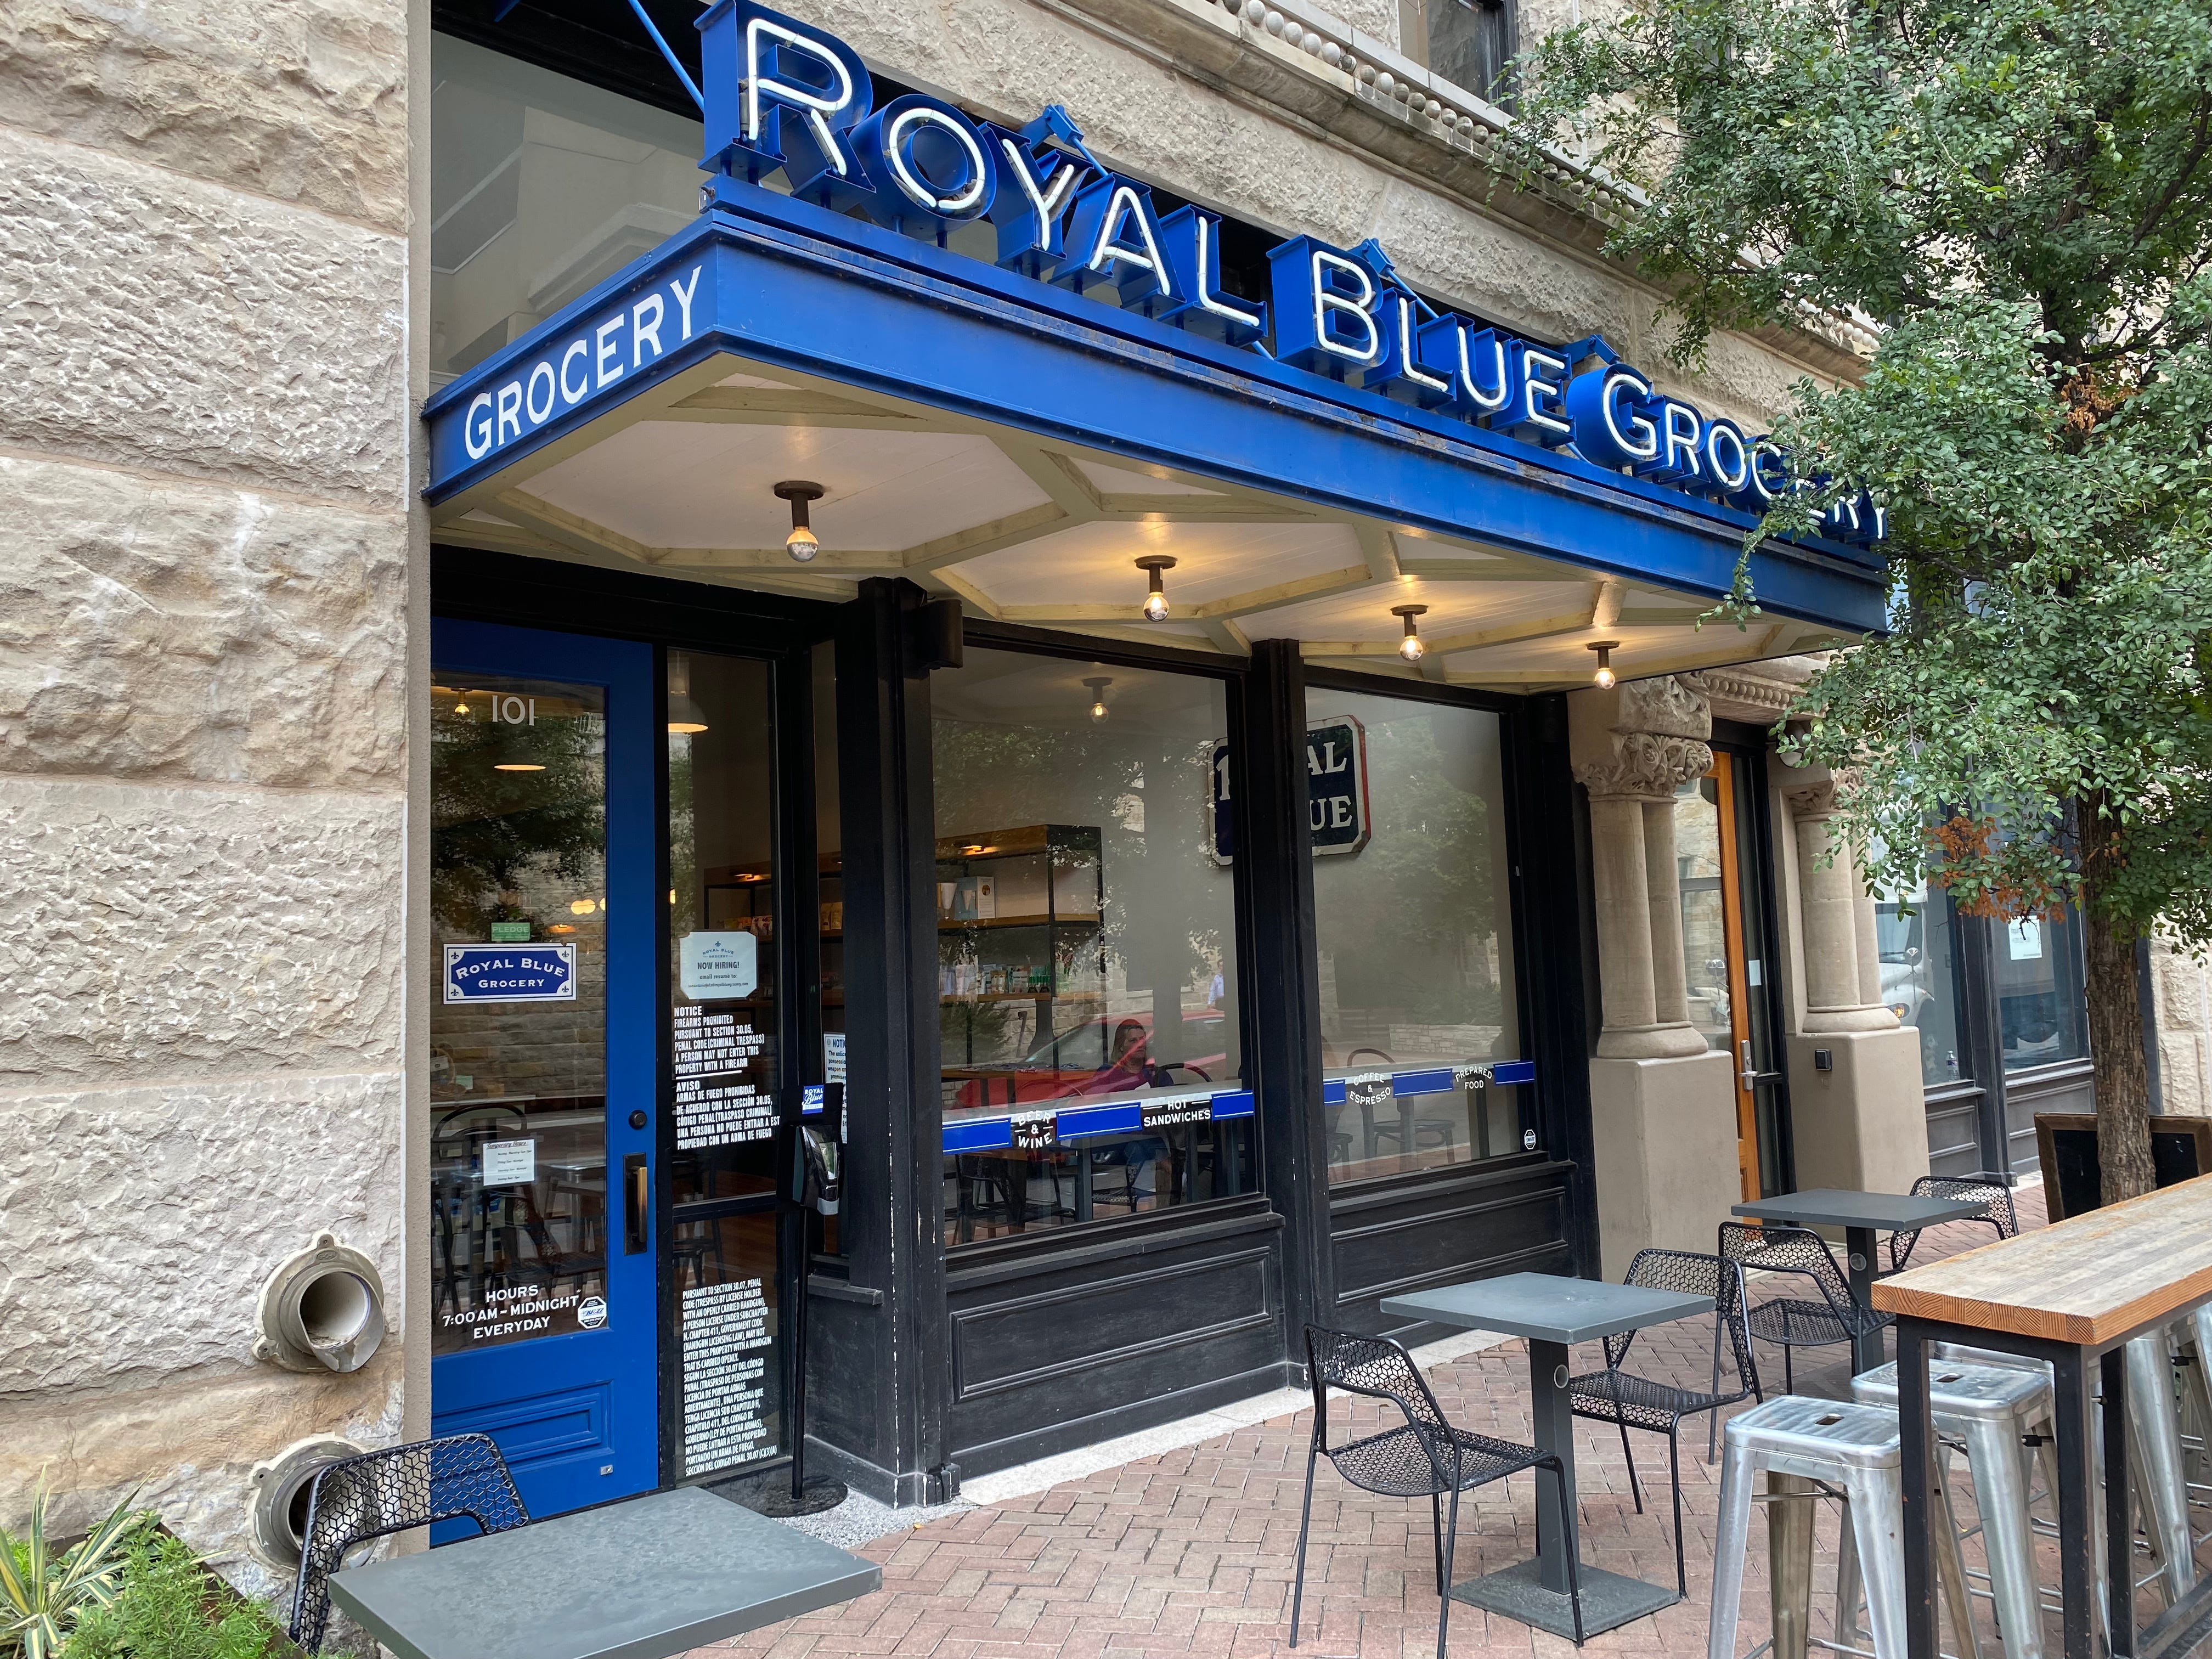 HOME  Royal Blue Grocery